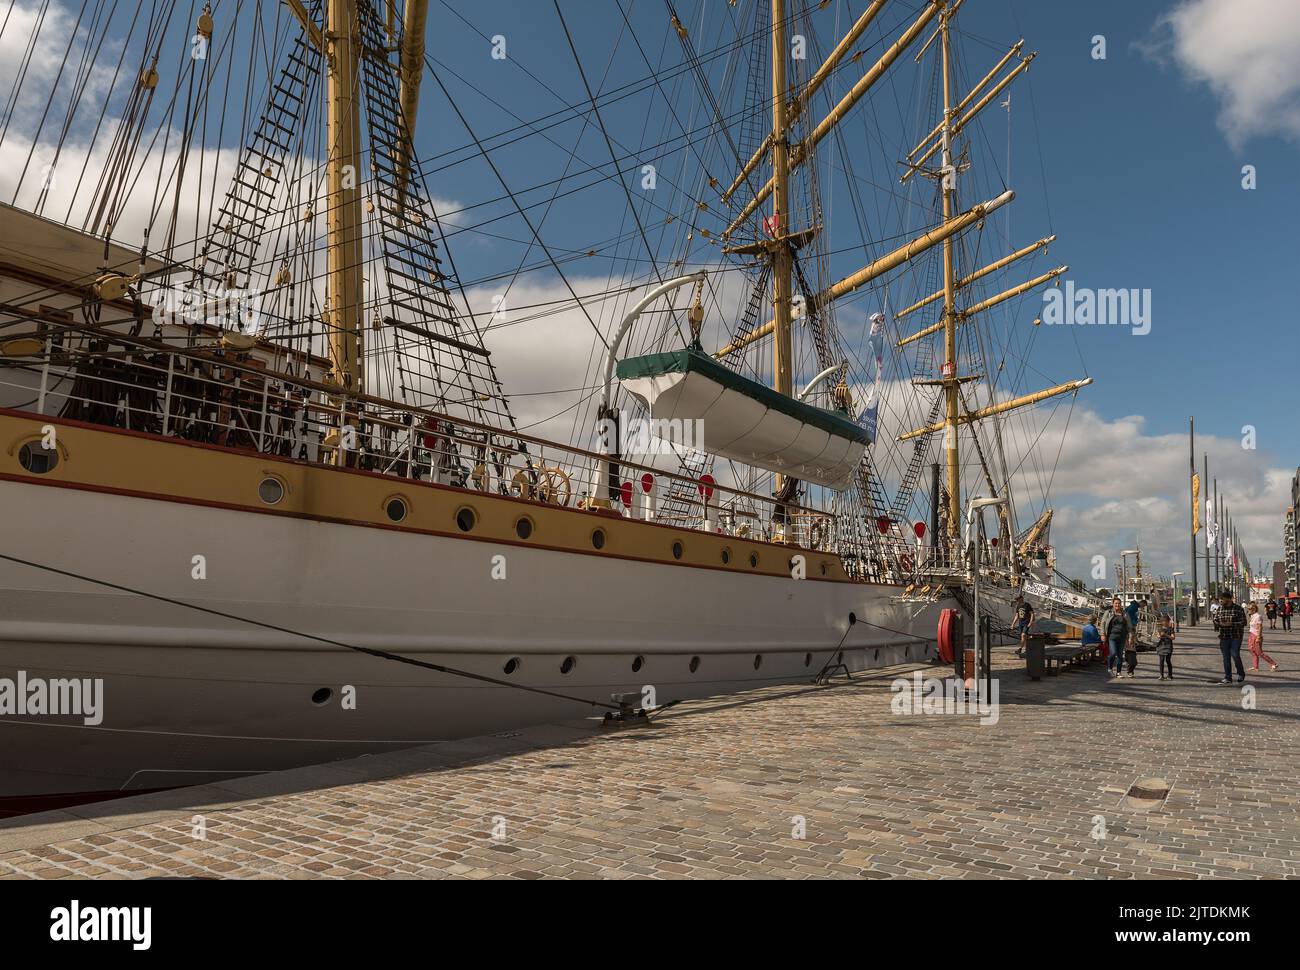 Sail training ship Germany in the new port, Bremerhaven Stock Photo